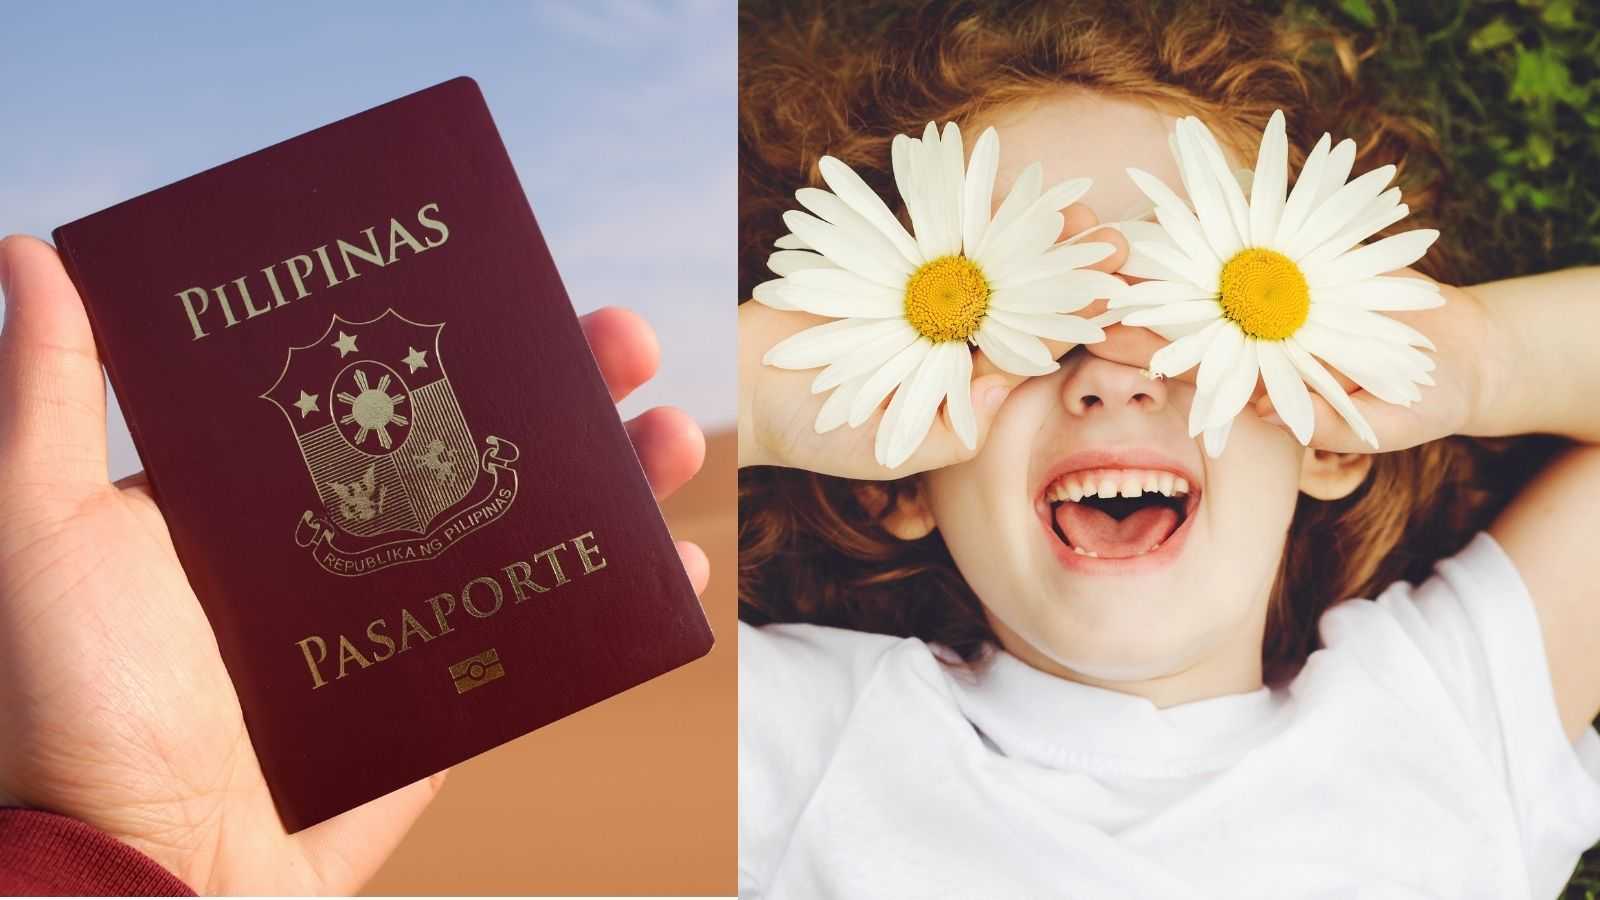 passport requirements for minors philippines